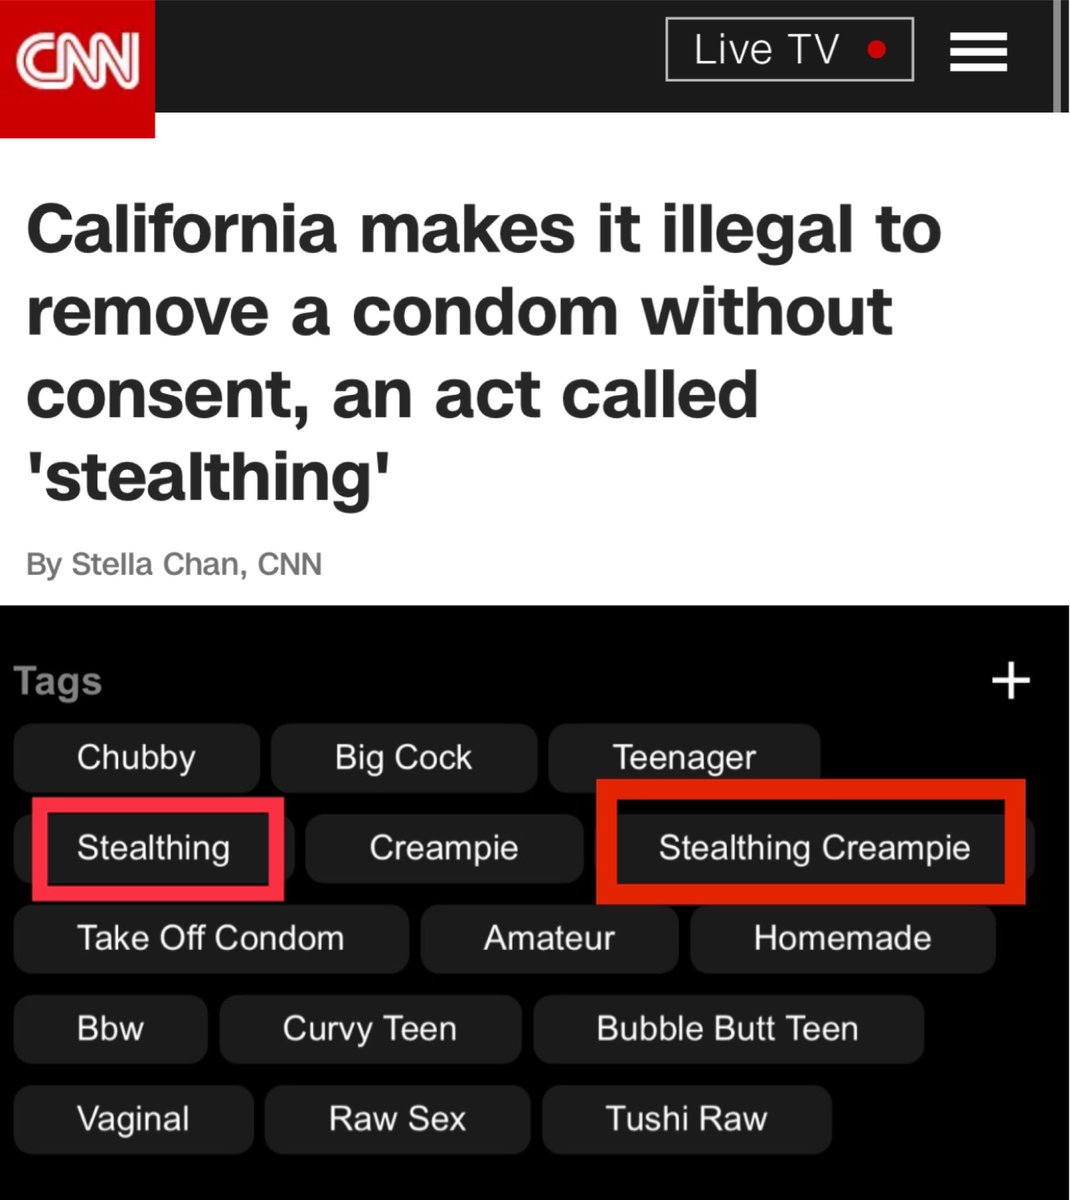 “Stealthing” is the act of secretly removing a condom during sex without consent. California has made stealthing illegal and has named it an act of sexual battery. Meanwhile on the Pornhub crime scene…#Traffickinghub Shut it down. 